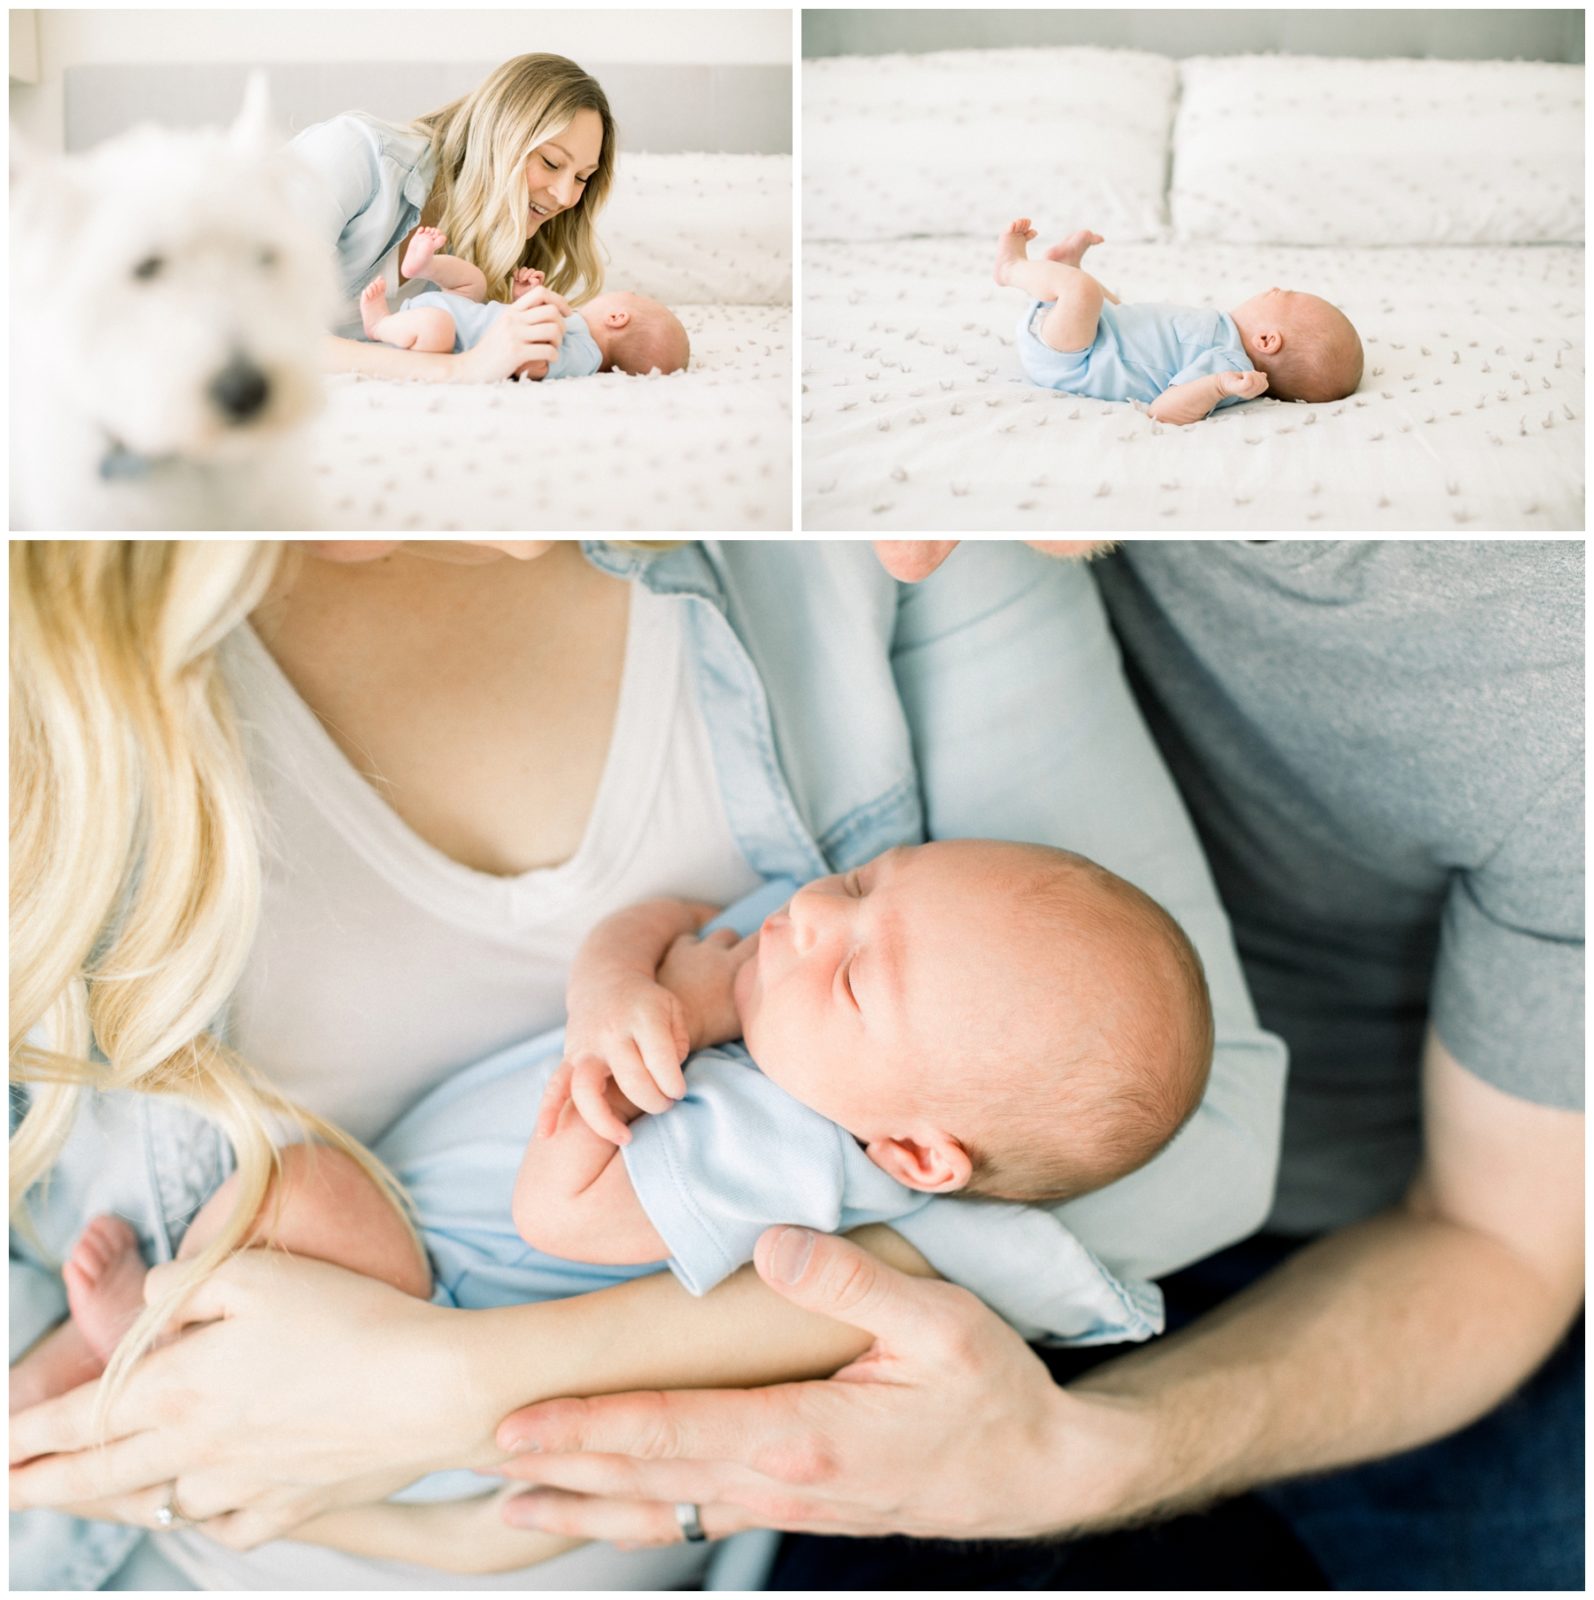 Three pictures. One shows a mother with a newborn baby and a dog. The other one is the baby lying down on a bed. The last picture is the parents holding the baby in their arms.